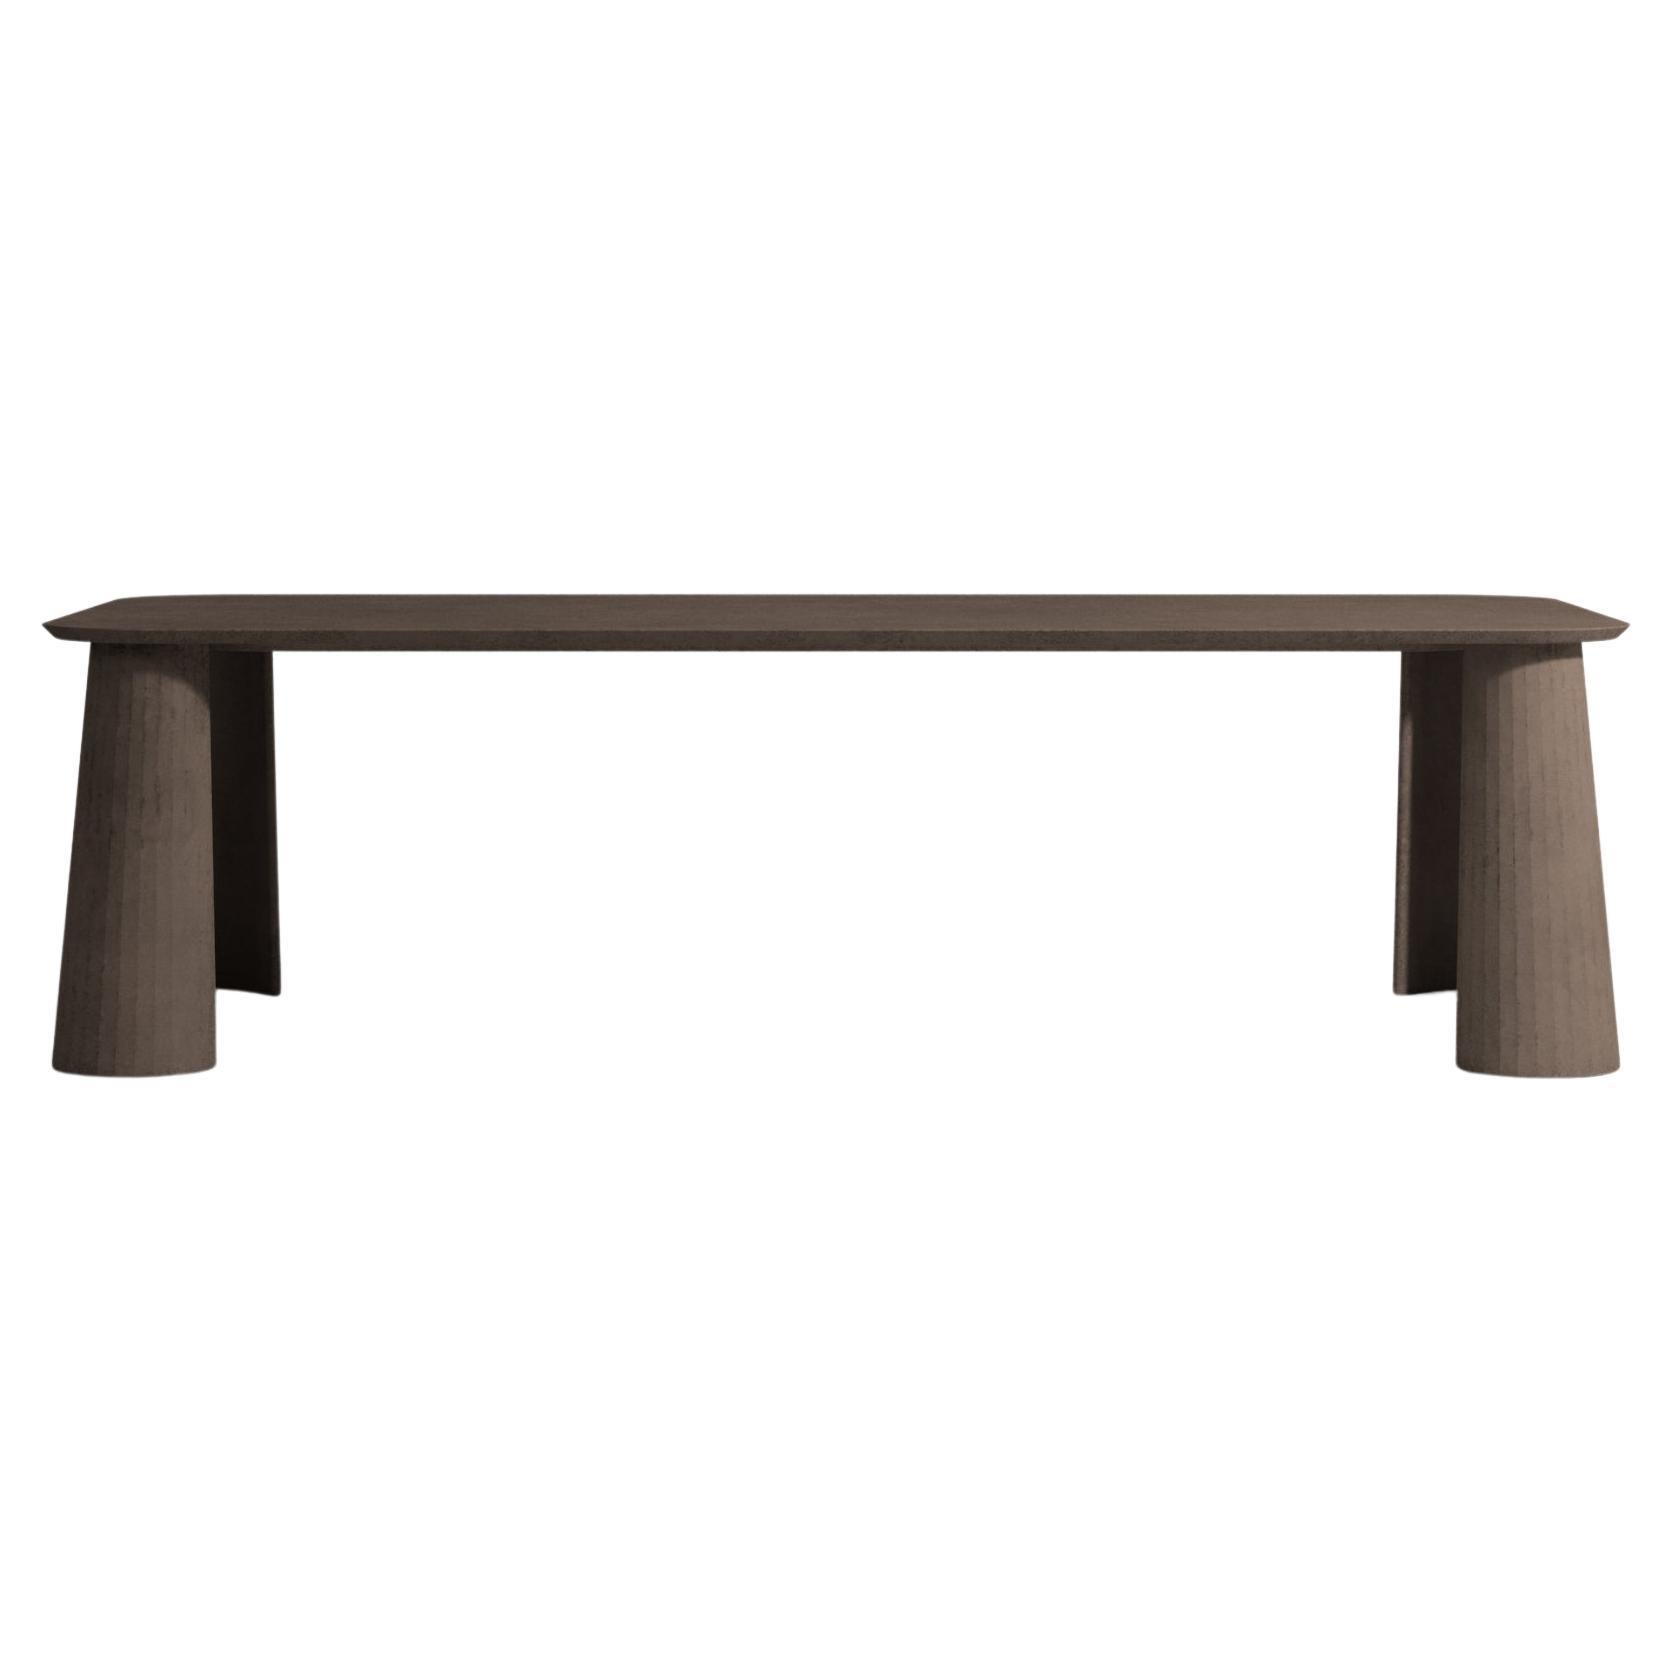 21st Century Studio Irvine Fusto Rectangular Dining Table Brown Cement Color For Sale